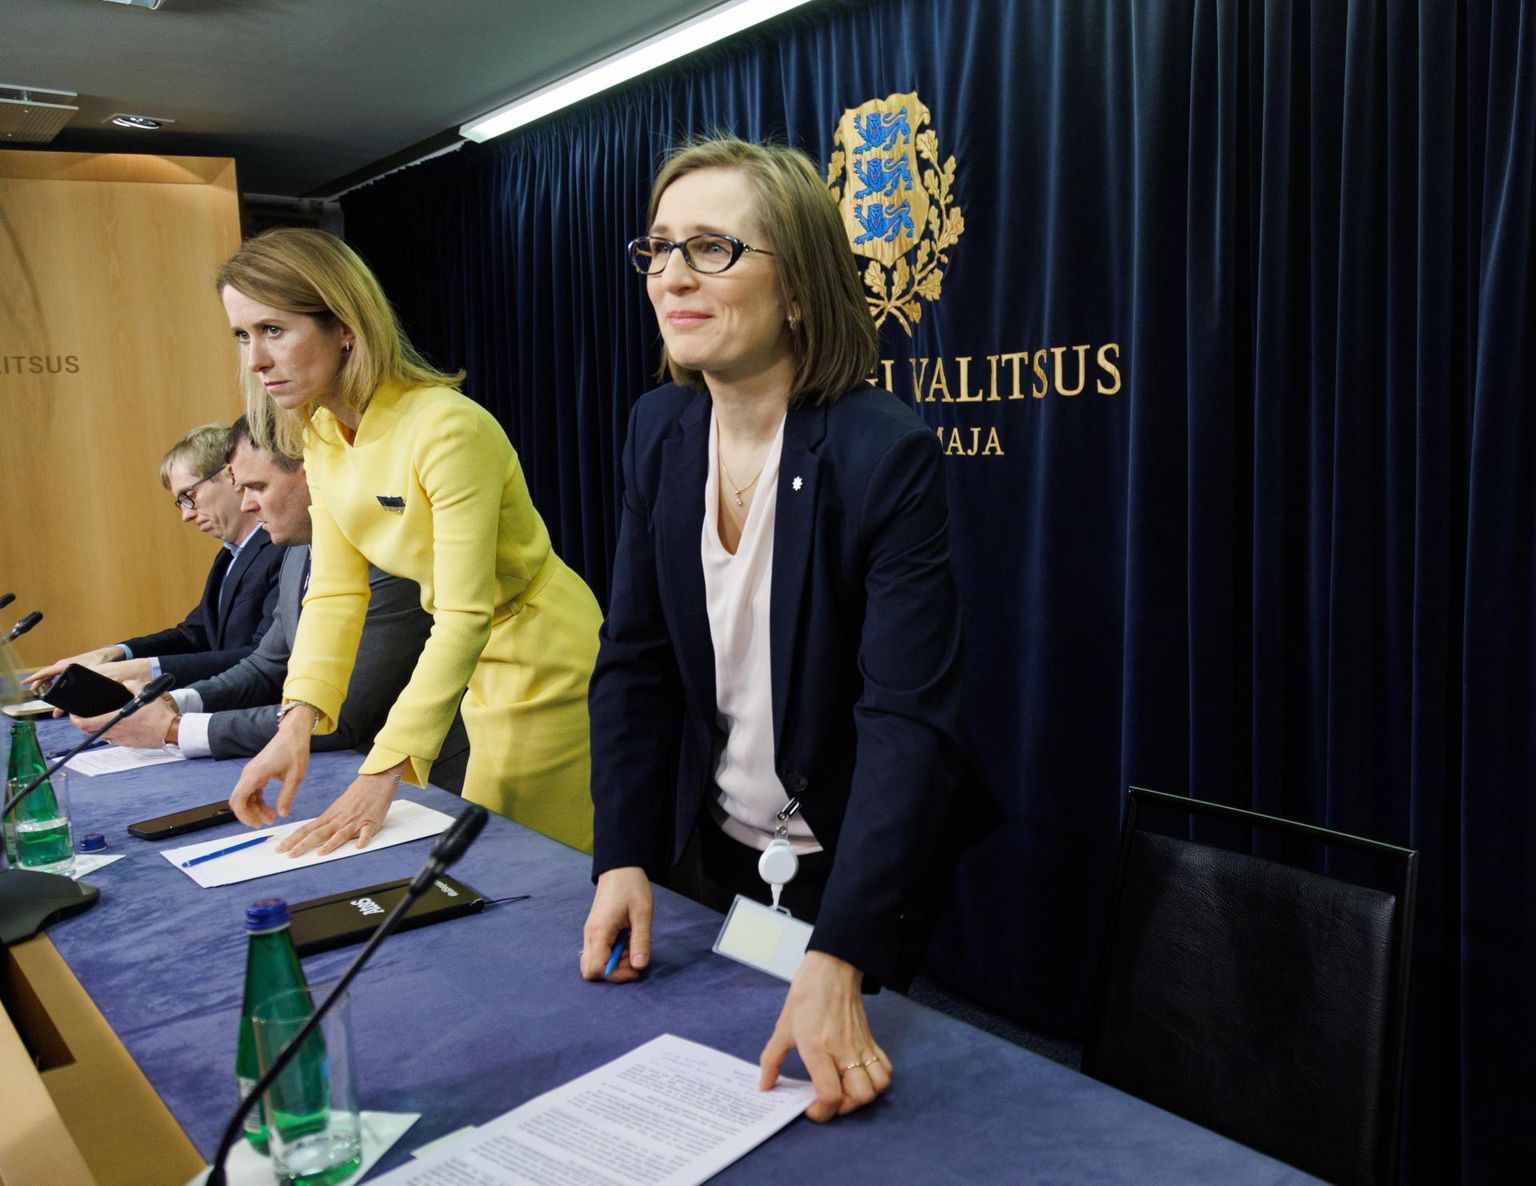 Prime Minister Kaja Kallas (left), Minister of Justice Lea Danilson-Järg (right). «If the Reform Party is willing to support its own bill, then it would be wise to move forward with it and seek support for it from other political parties in the parliament,» says the Minister of Justice.